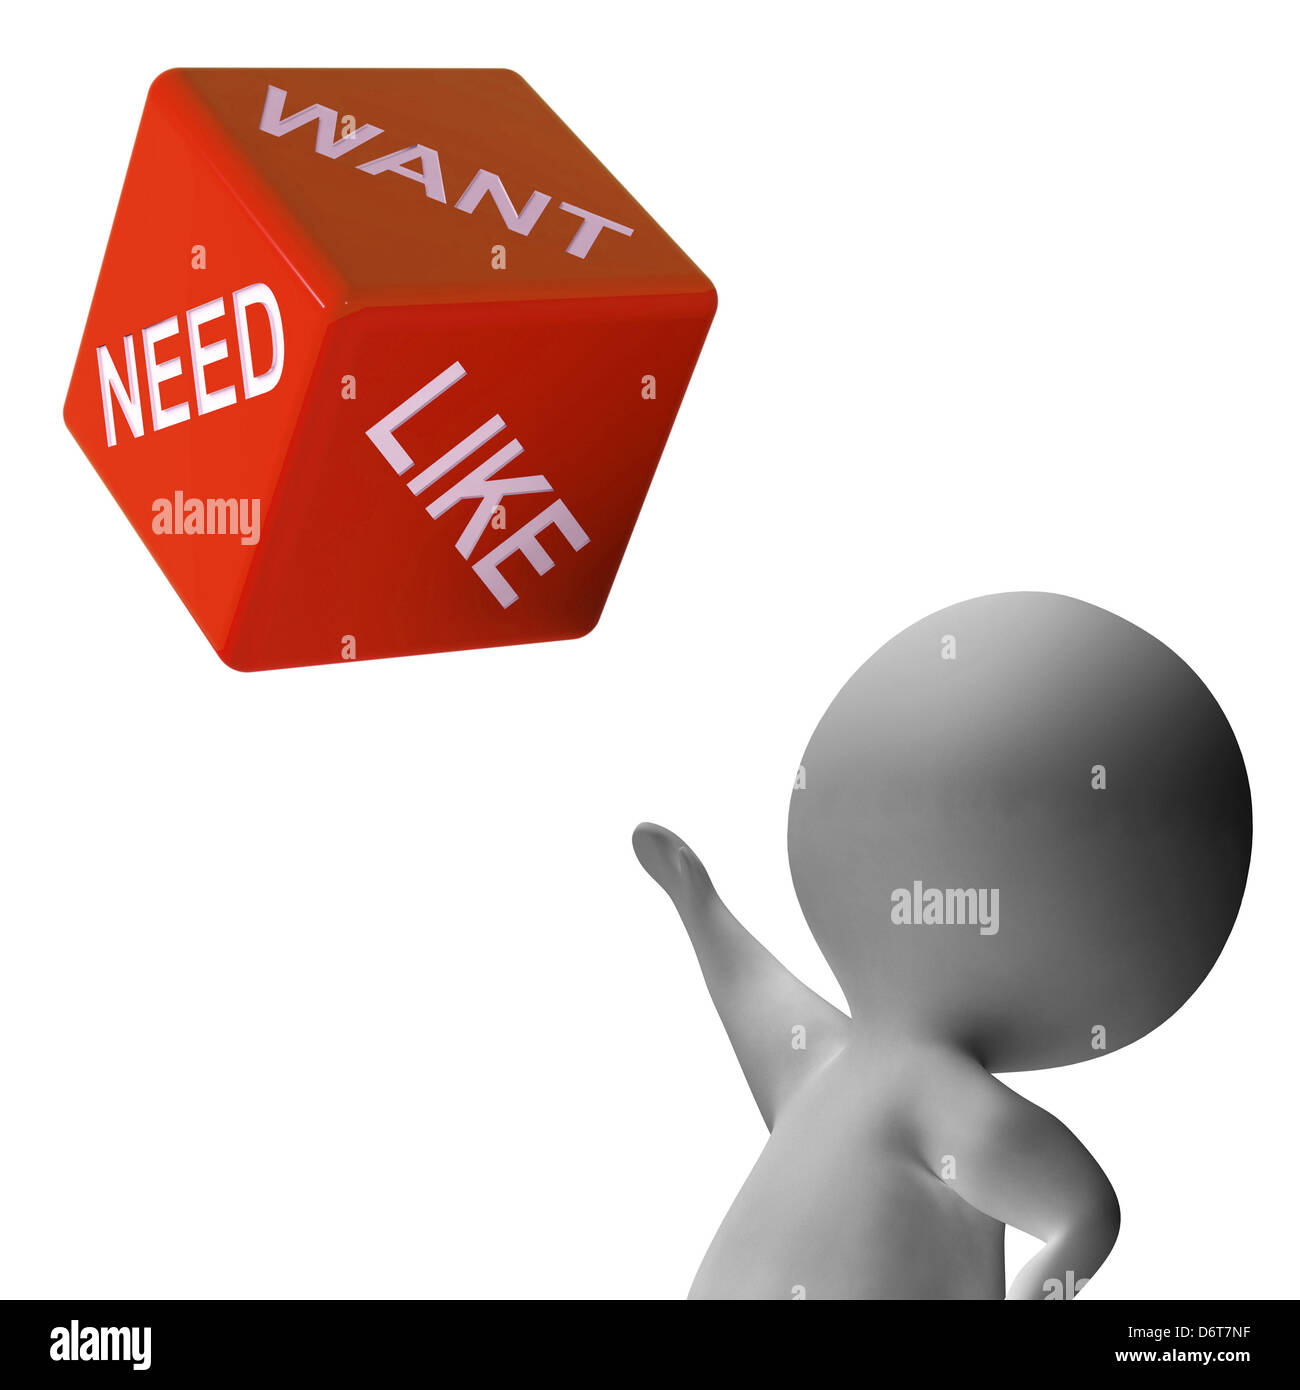 Need Want And Like Dice Shows Desires Stock Photo